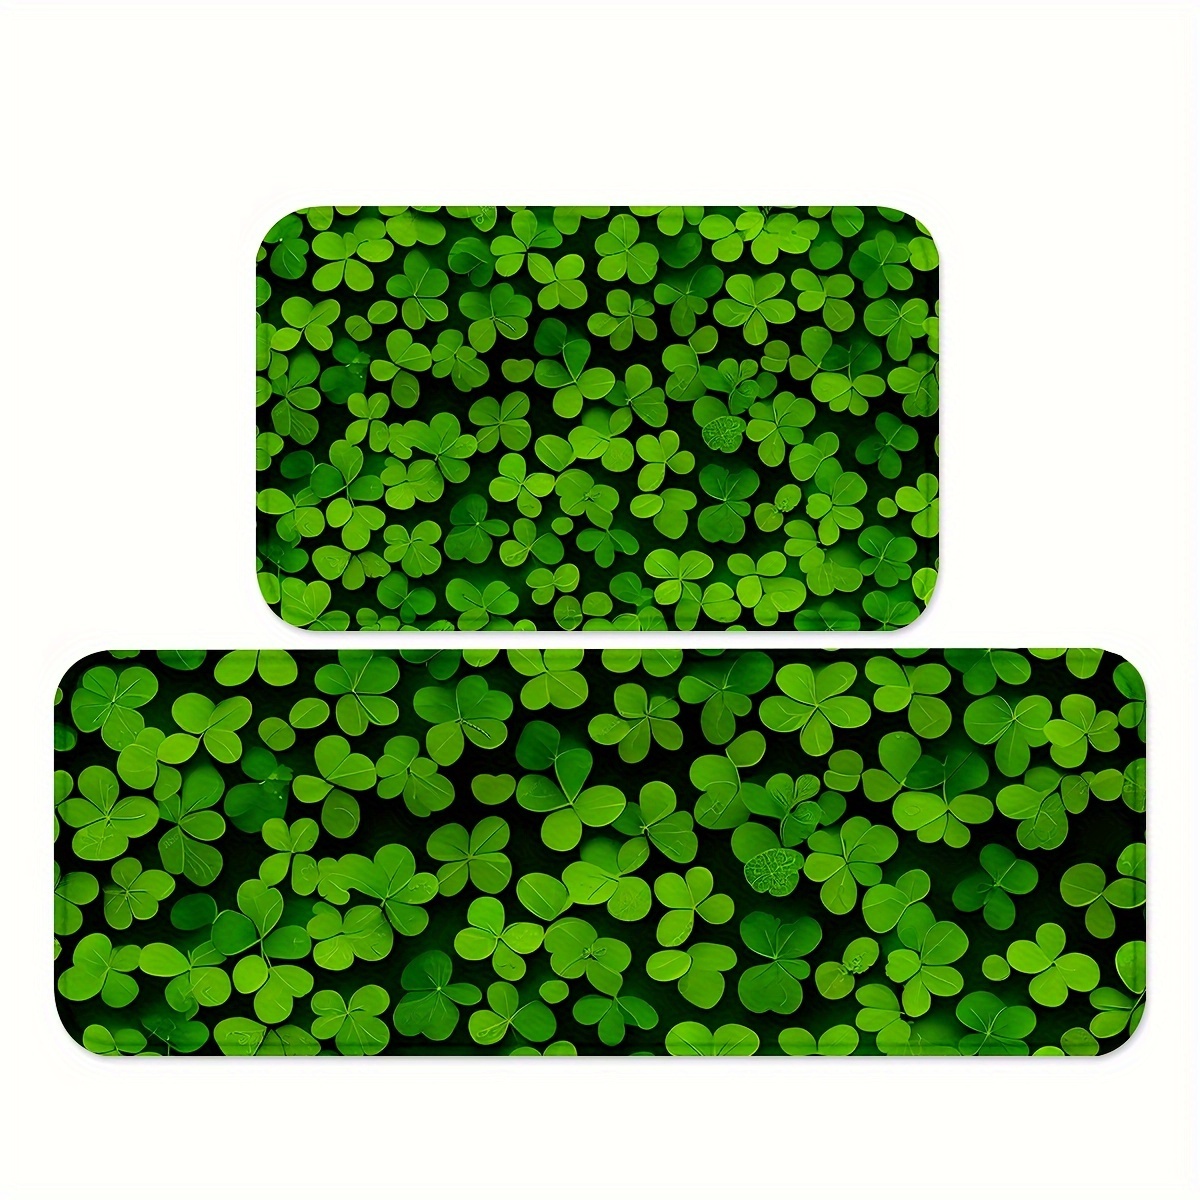 

1/2pcs Refreshing Clover Print Kitchen Mats, Anti-fading Sink Cushions, Comfortable Crawling Rugs, For Home Farmhouse Laundry Room Bathroom Spring Decor High Traffic Area St. Patrick's Day